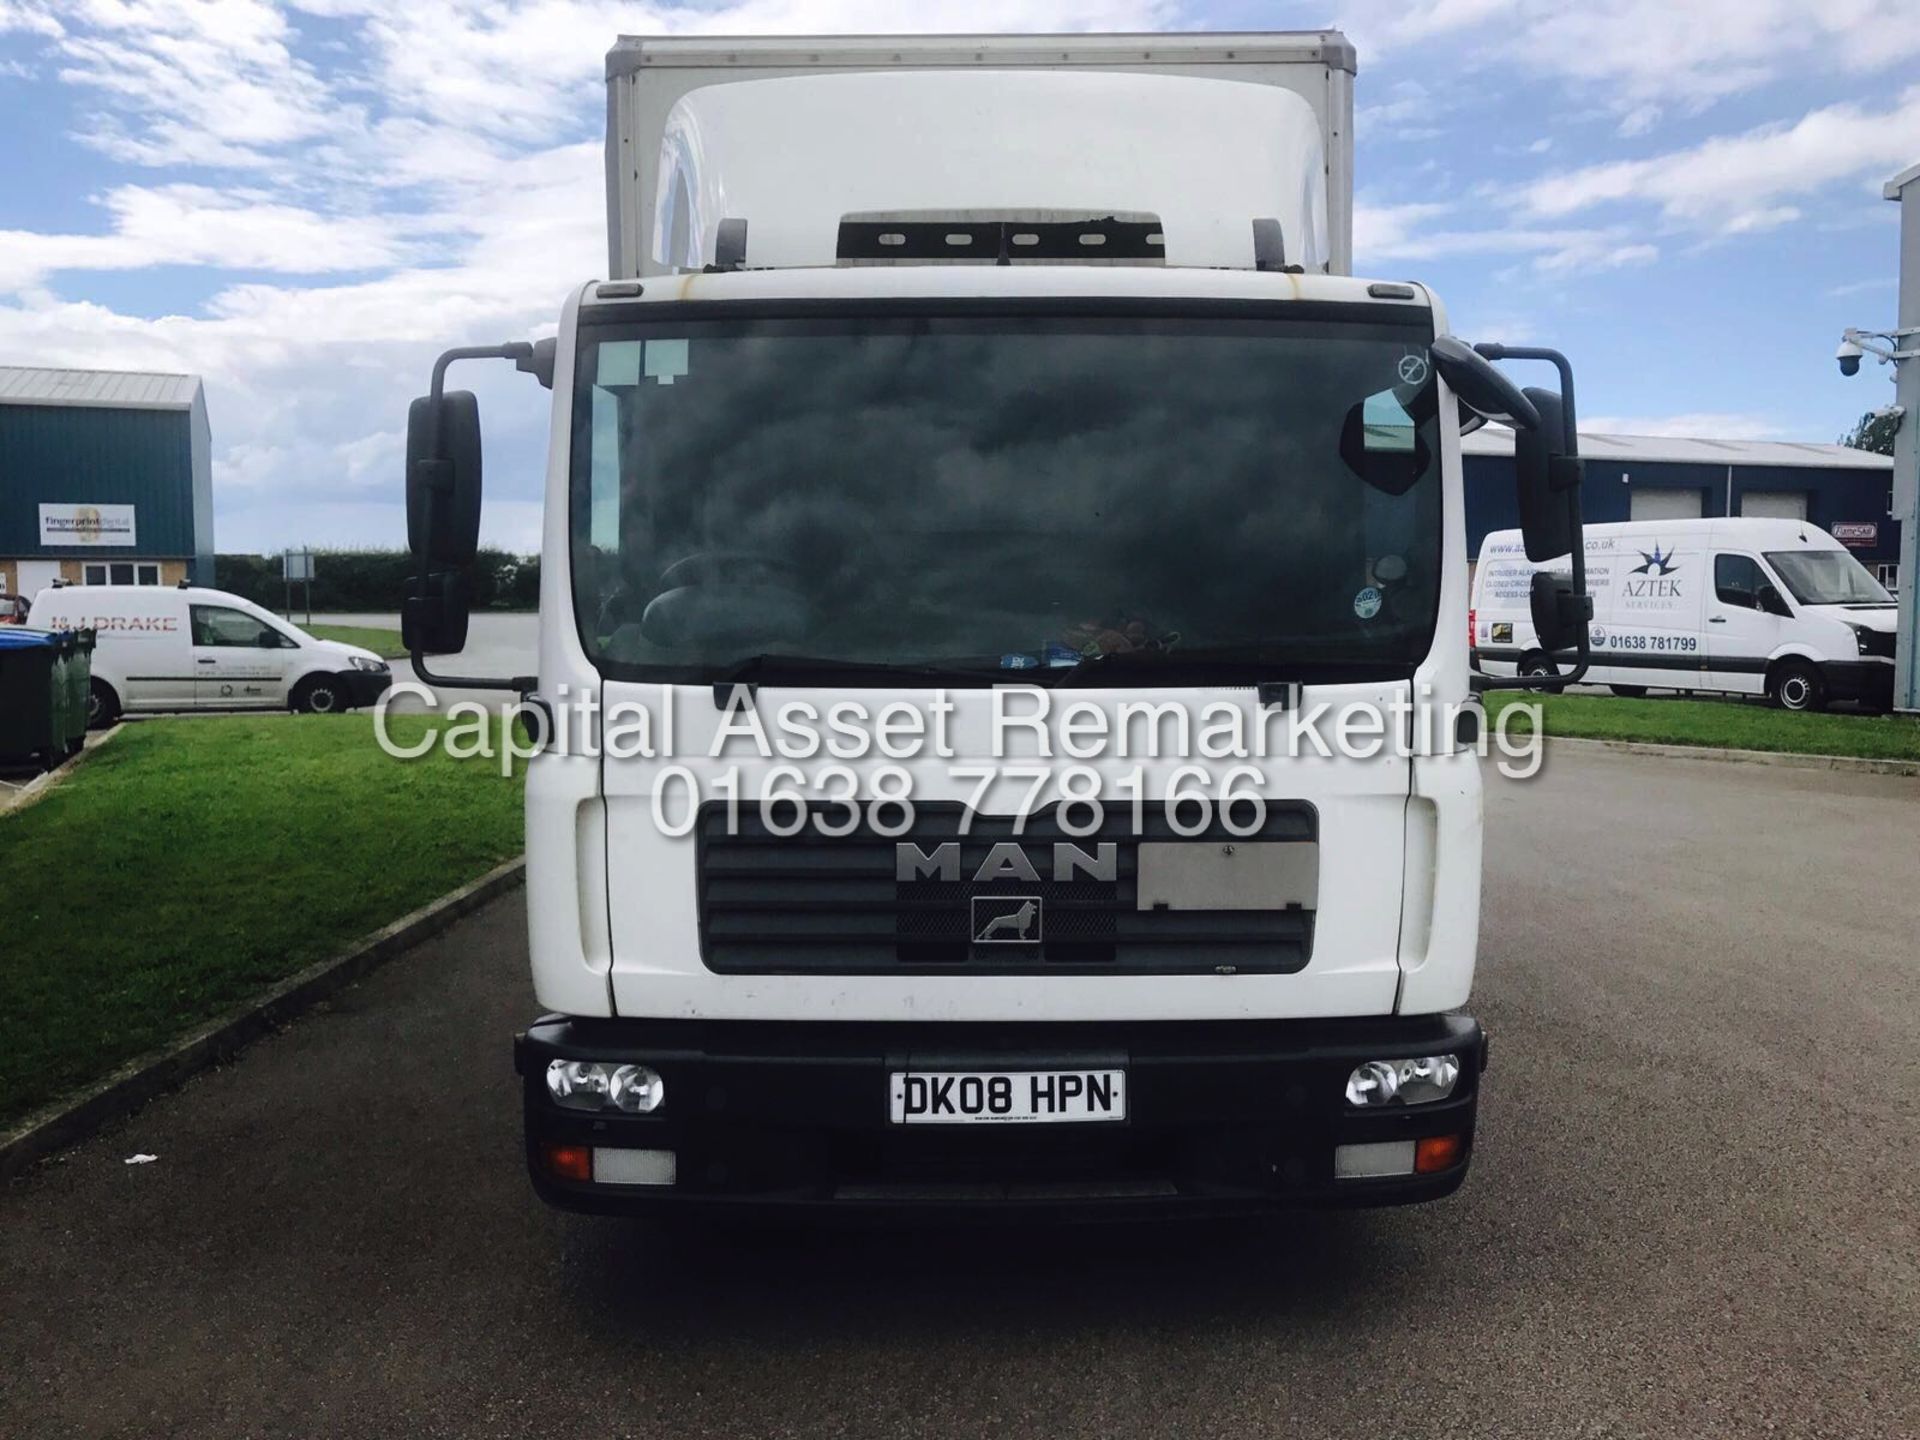 MAN TGL7 "150" 20 FOOT CURTAIN SIDE TRUCK (08 REG) PLATED UNTIL END OF FEB 2018 -TUCK AWAY TAIL LIFT - Image 3 of 14